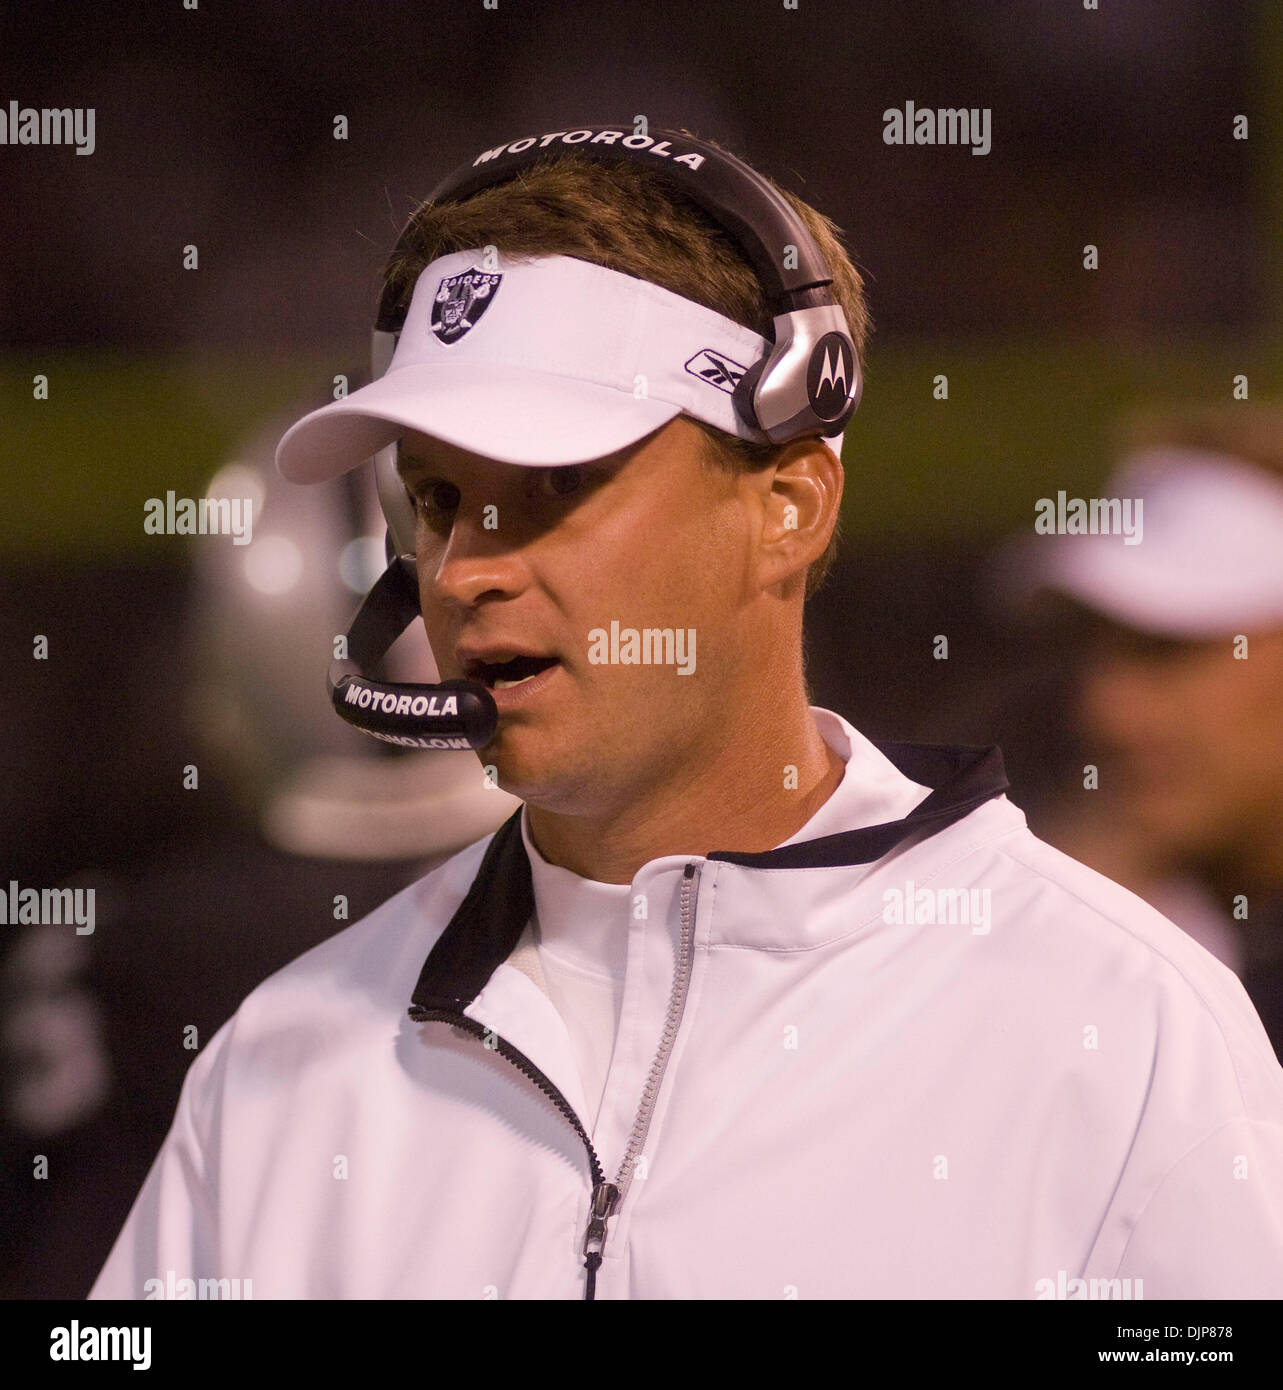 Aug 08, 2008 - OAKLAND, CA, USA - Oakland Raiders head coach LANE KIFFIN watches the game against the San Francisco 49ers at McAfee Coliseum. (Credit Image: © AL GOLUB/Golub Photography/Golub Photography) Stock Photo